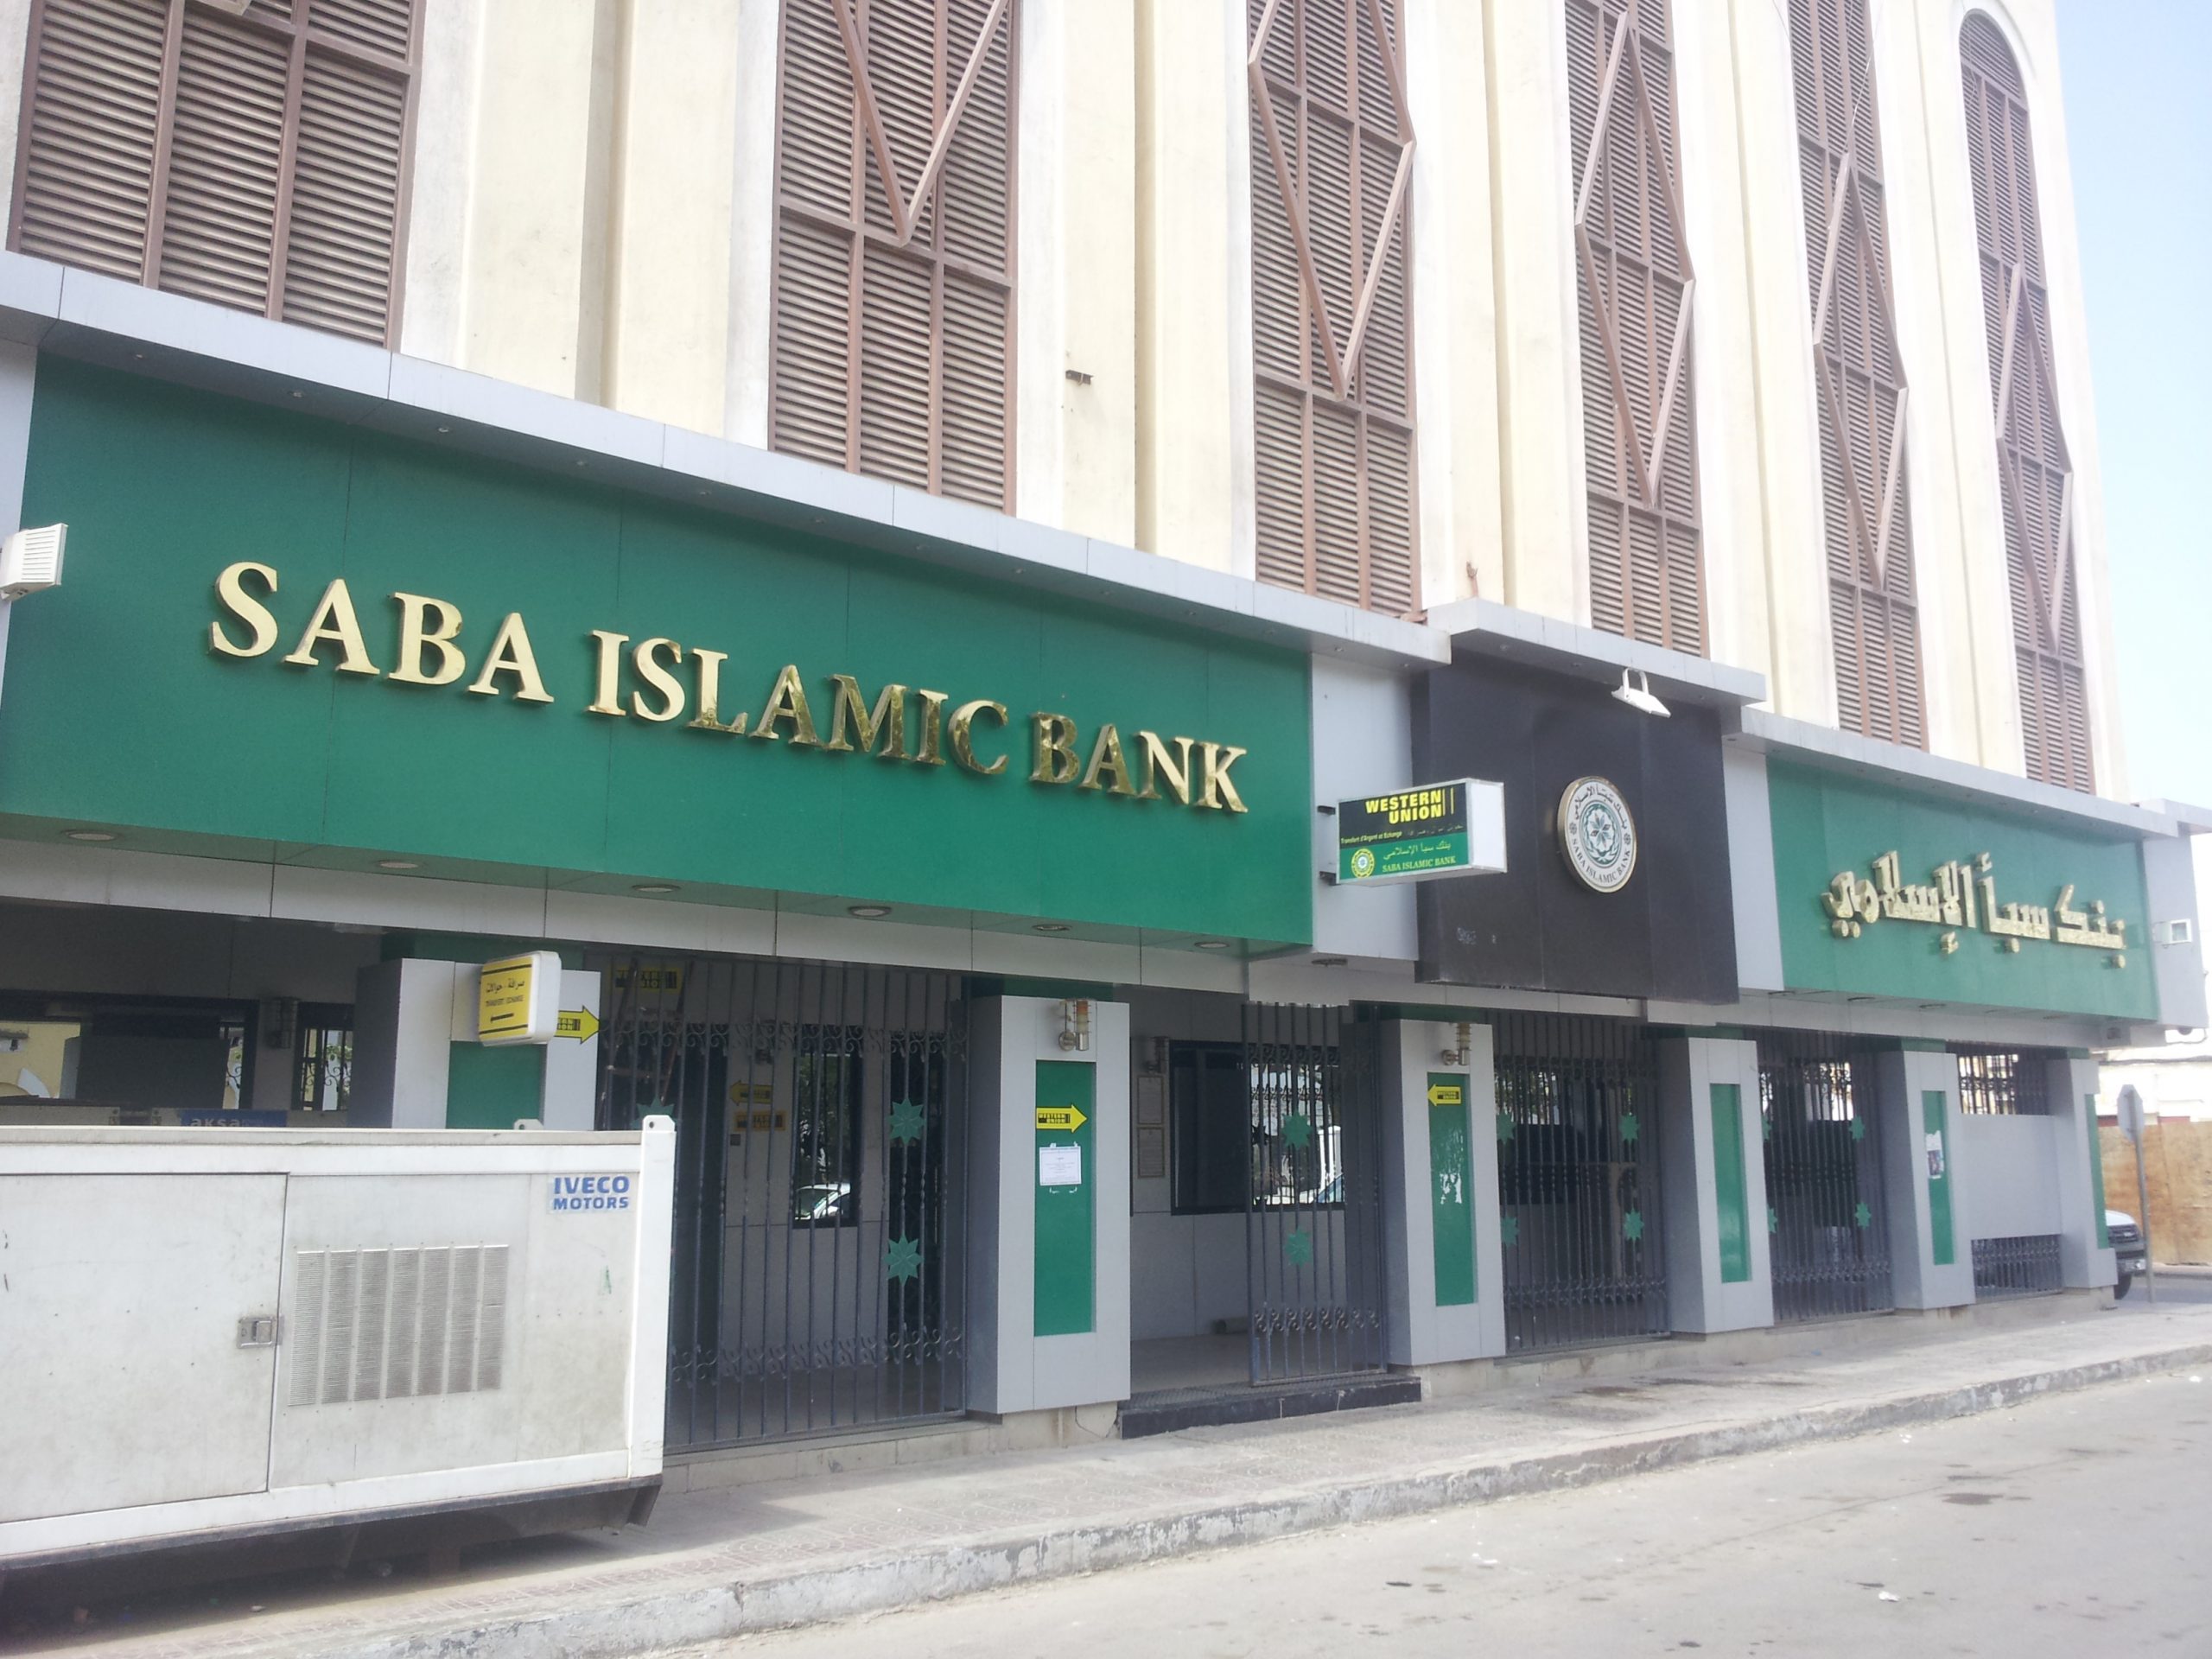 ‘Islam, for a Better World?’ – The World of Islamic Banking